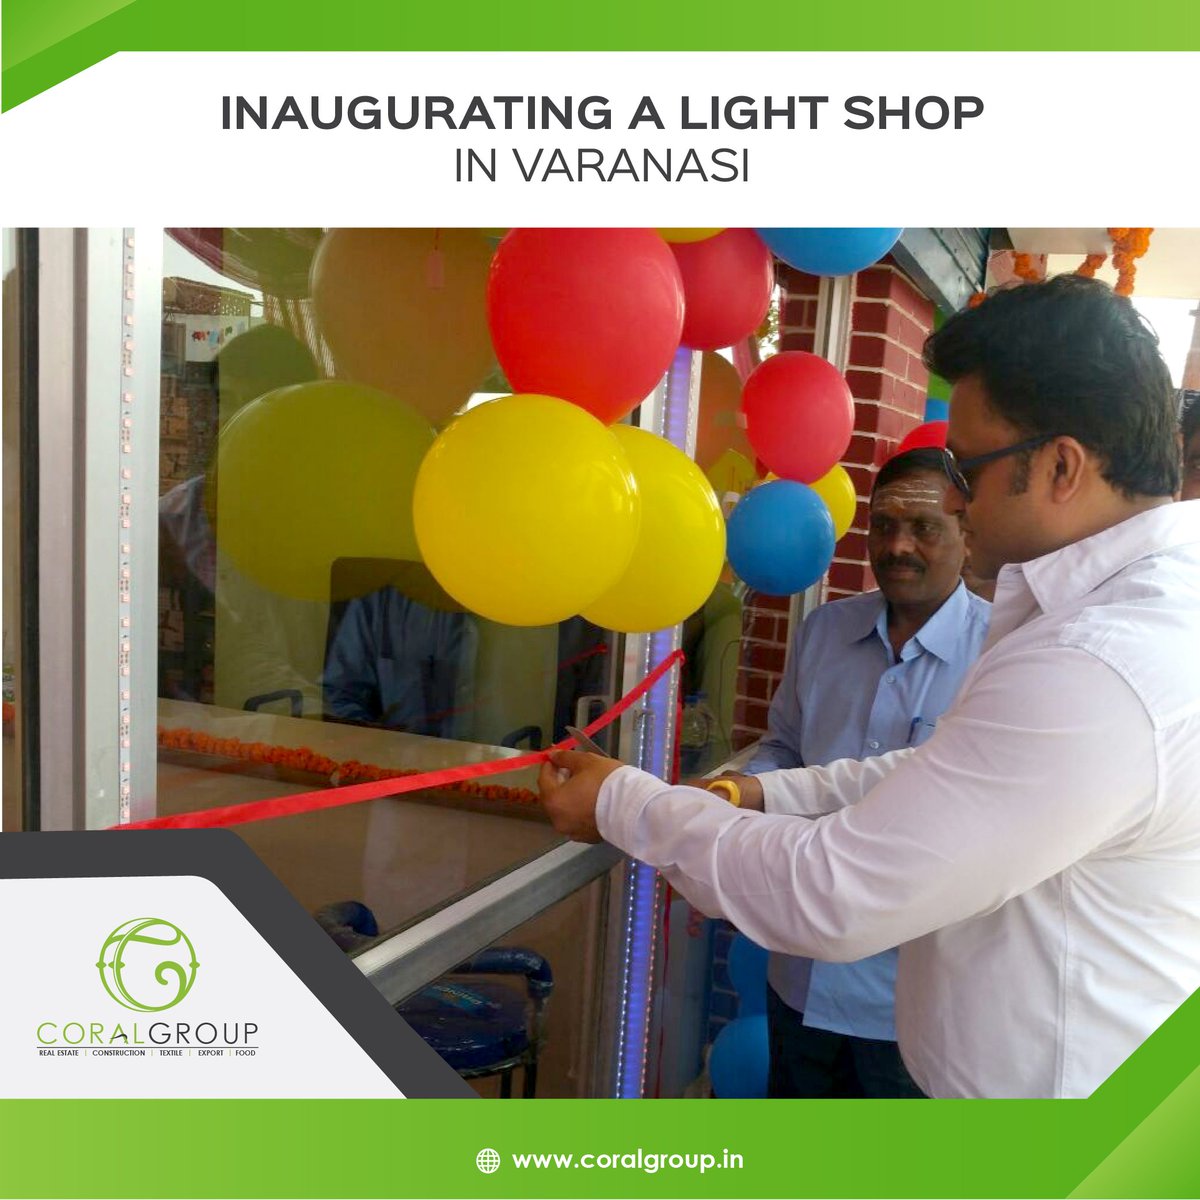 Mr. Khalid Ansari embarking on a new venture by inaugurating a retail store. 

To know more Call : +91 542 2397777 or visit : coralgroup.in

#RealEstate #CoralGroup #CoralGreensBuildtech #Varanasi